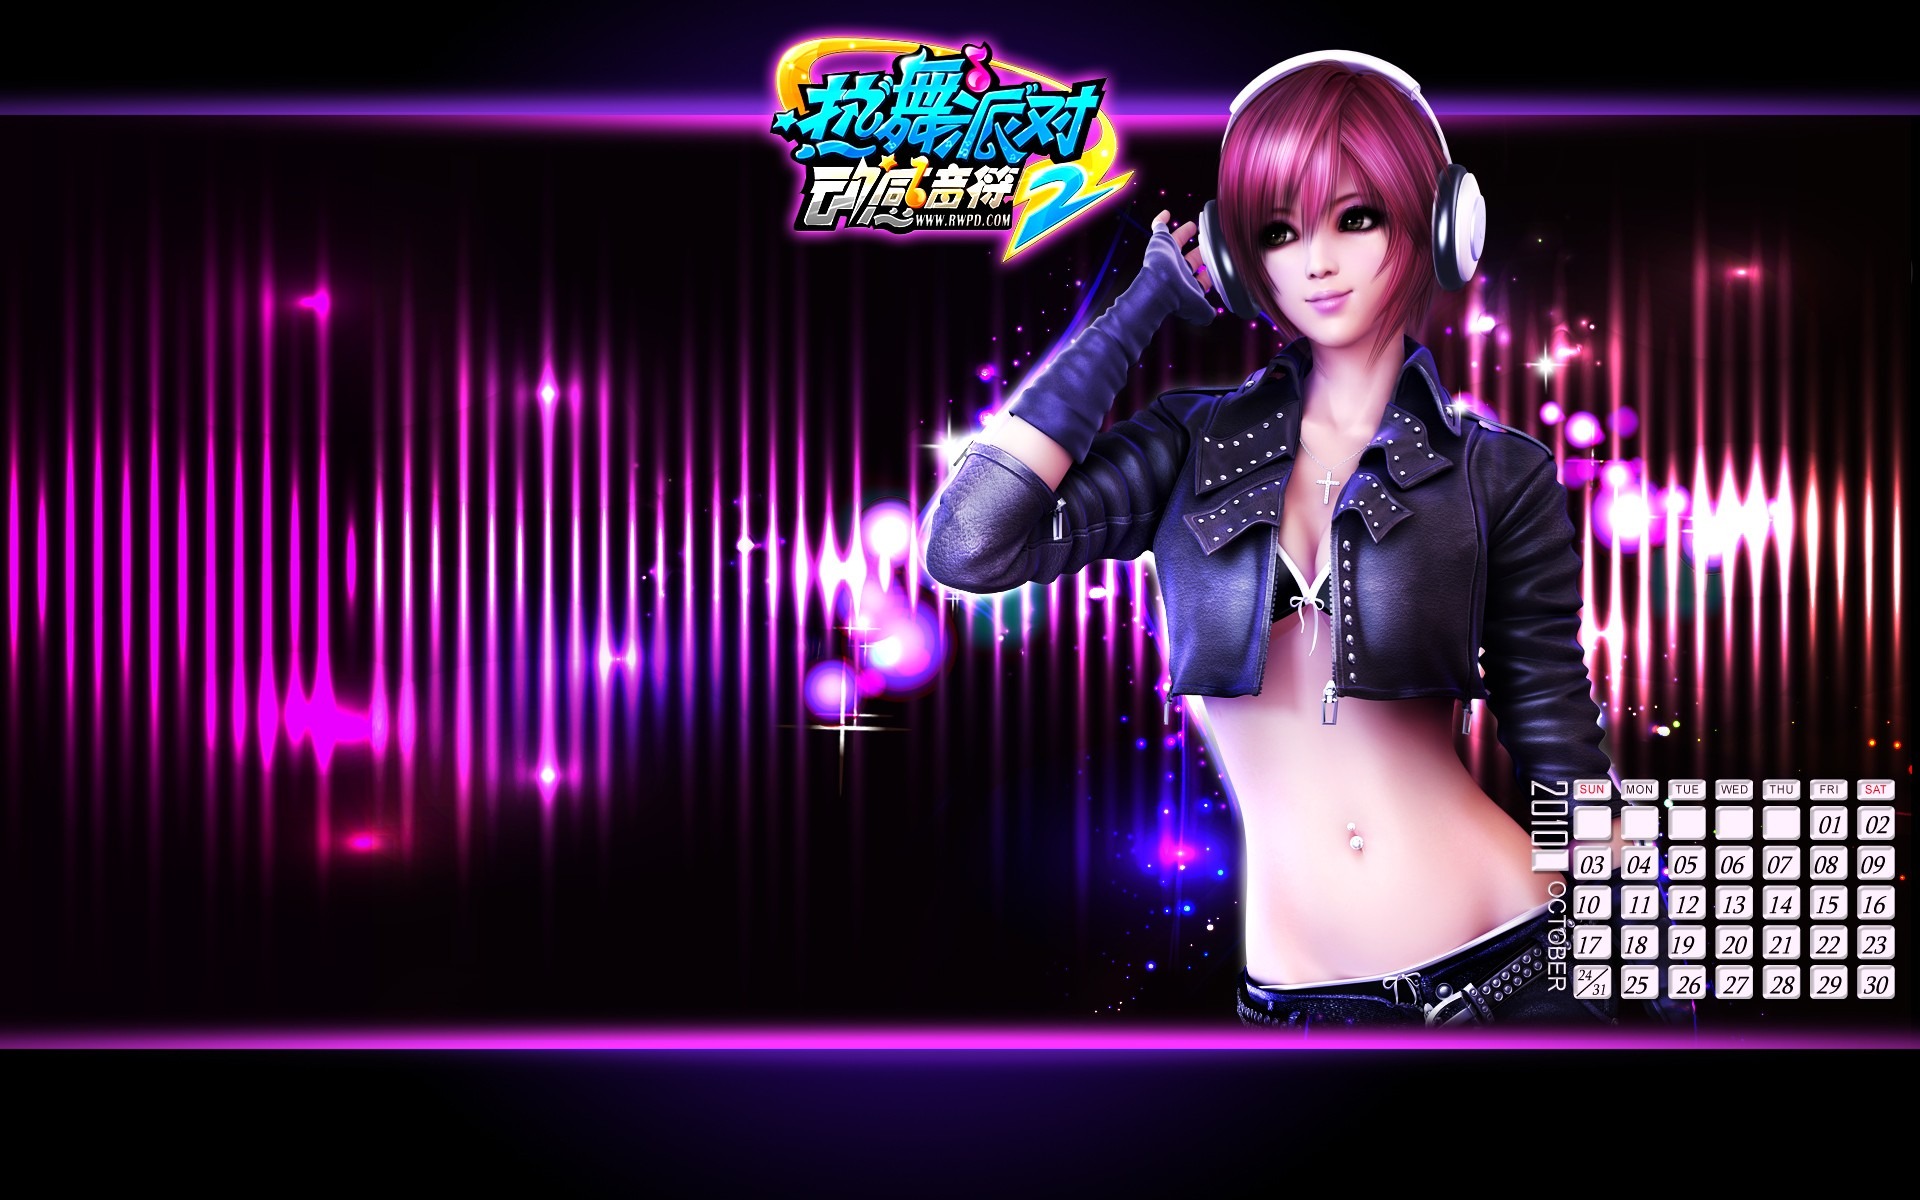 Online game Hot Dance Party II official wallpapers #34 - 1920x1200